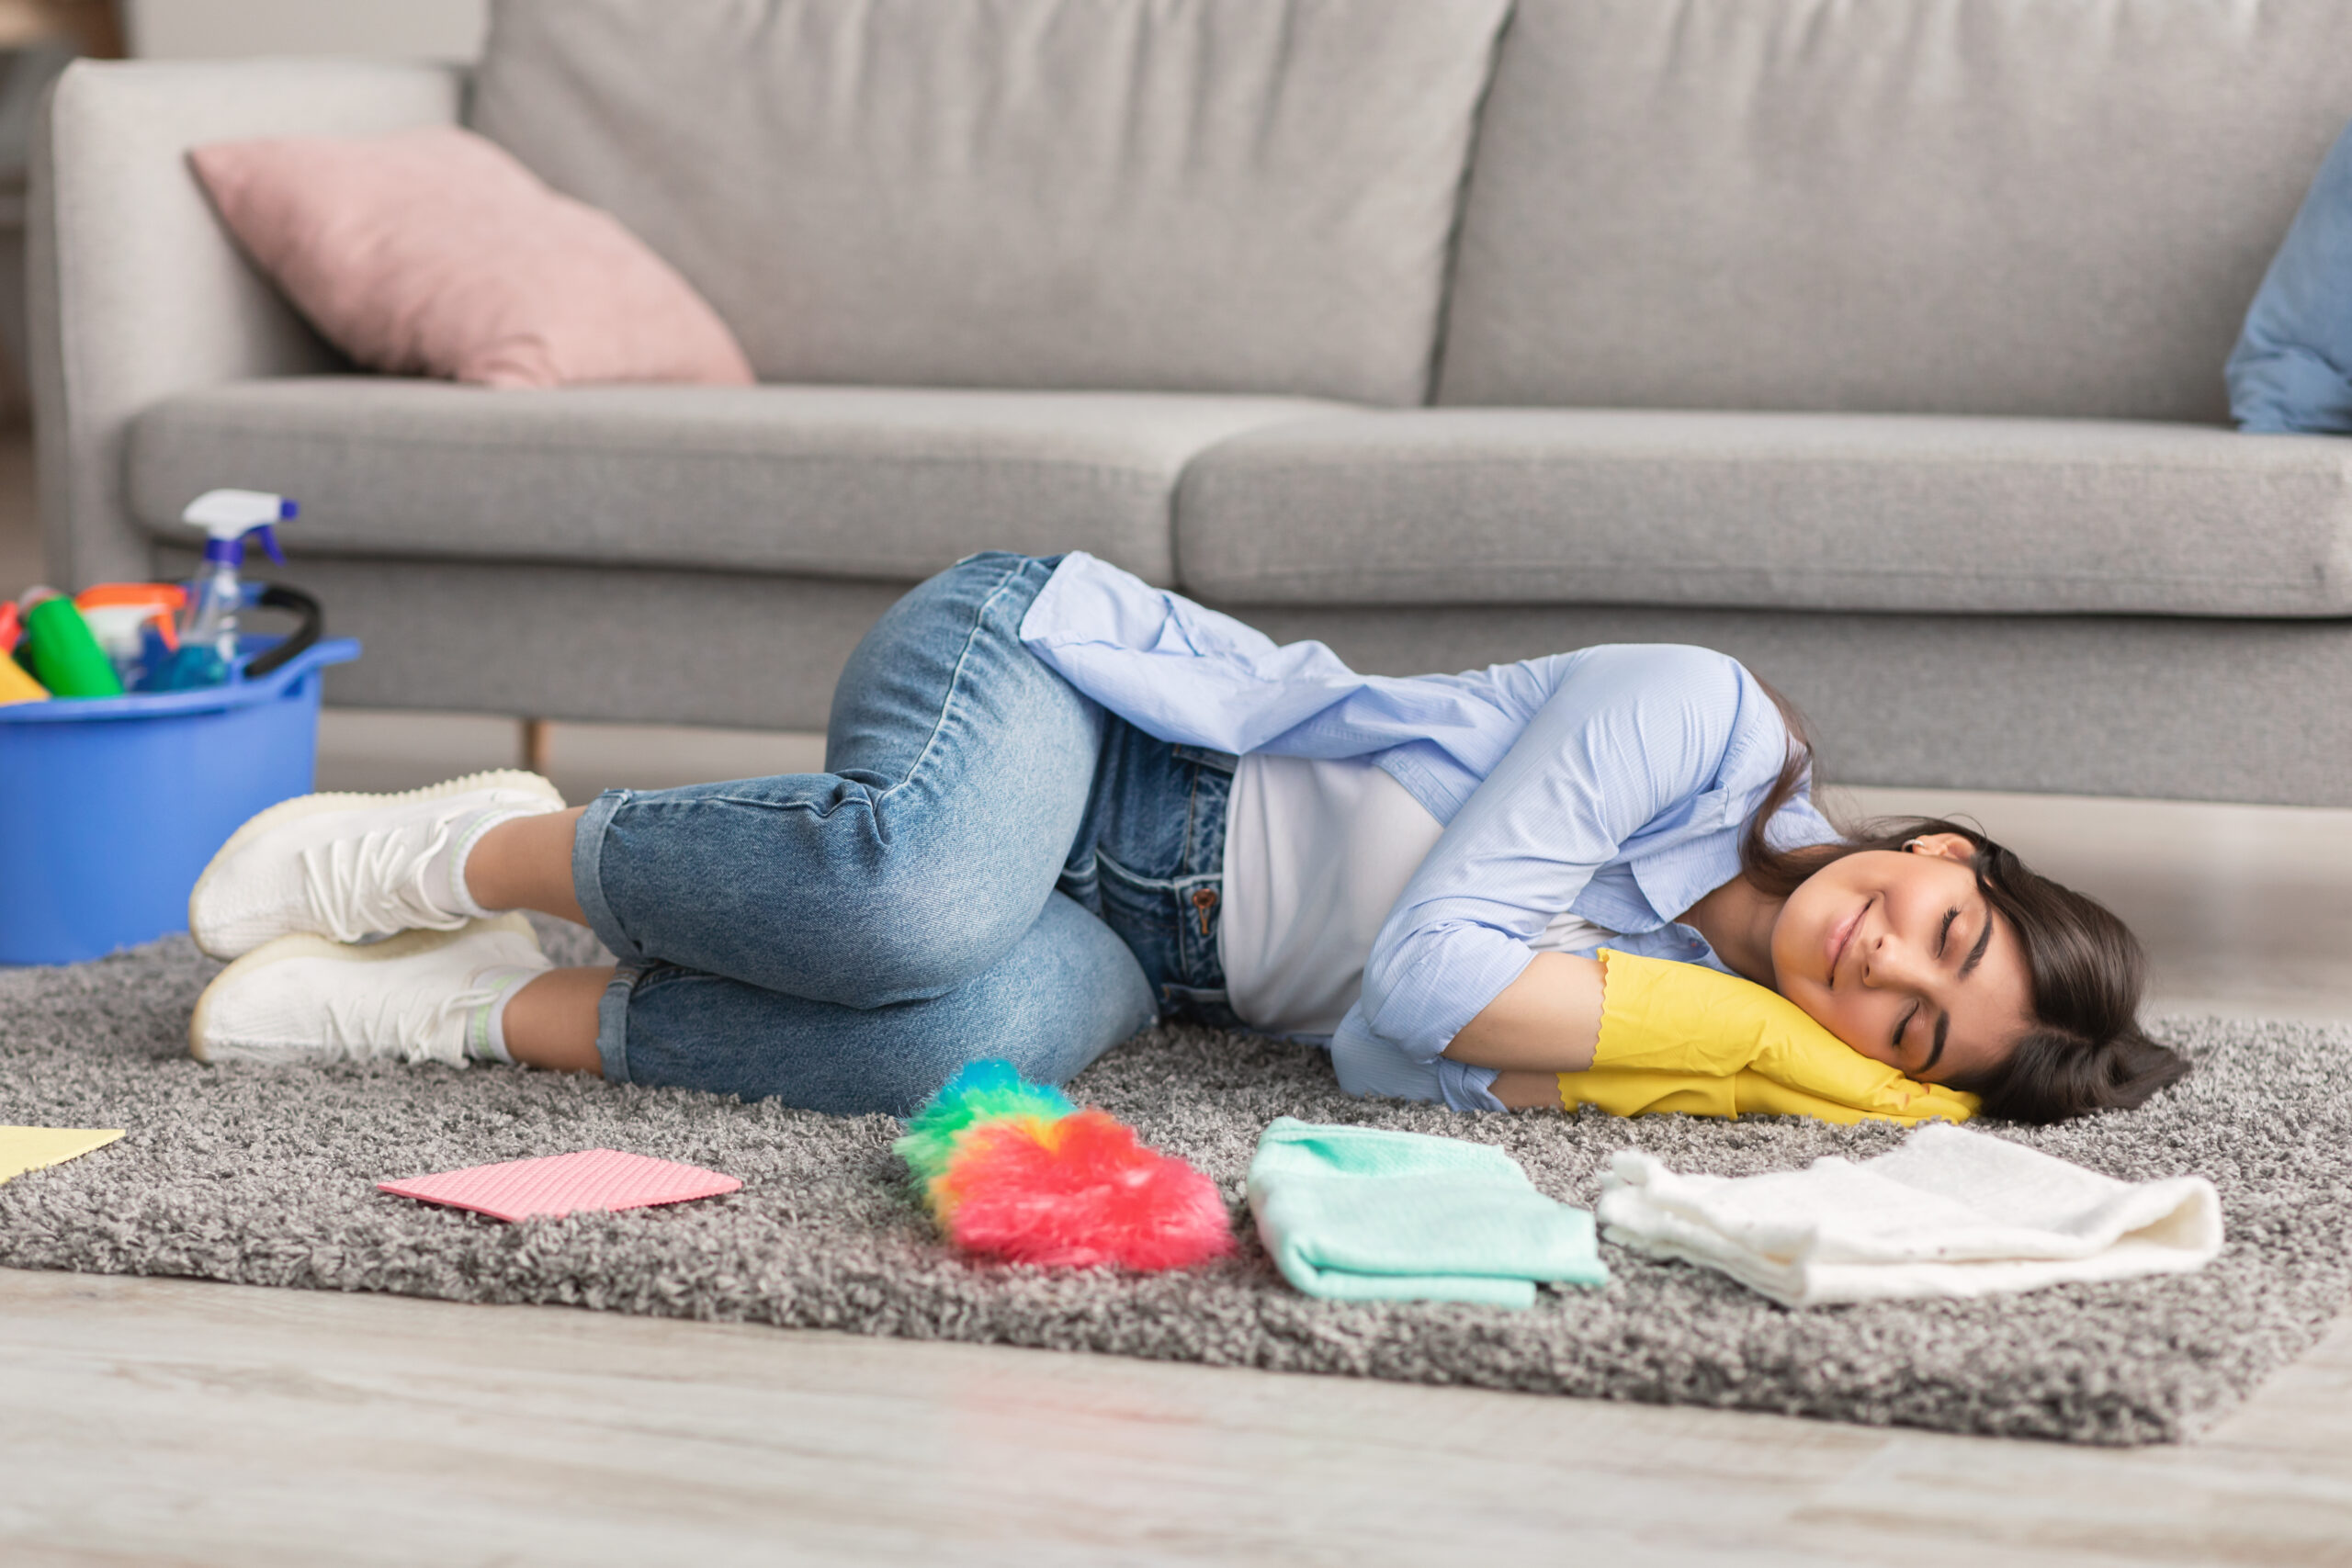 Tired millennial housewife sleeping on gray rug carpet in living room, surrounded by cleaning supplies, copy space. Overworked young lady napping, exhausted after domestic duties, needing rest